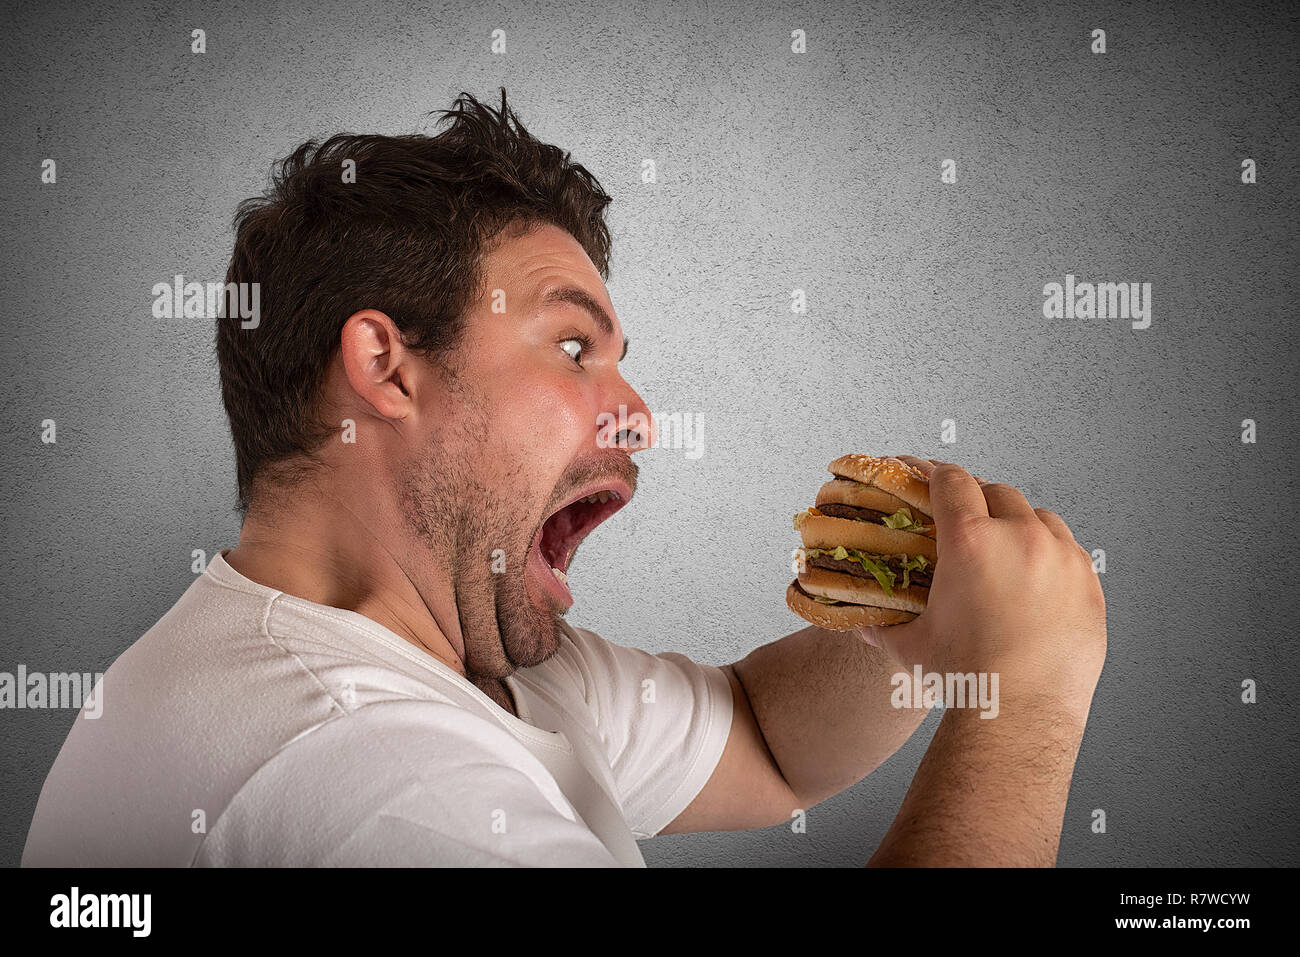 Insatiable and hungry man eating a sandwich Stock Photo